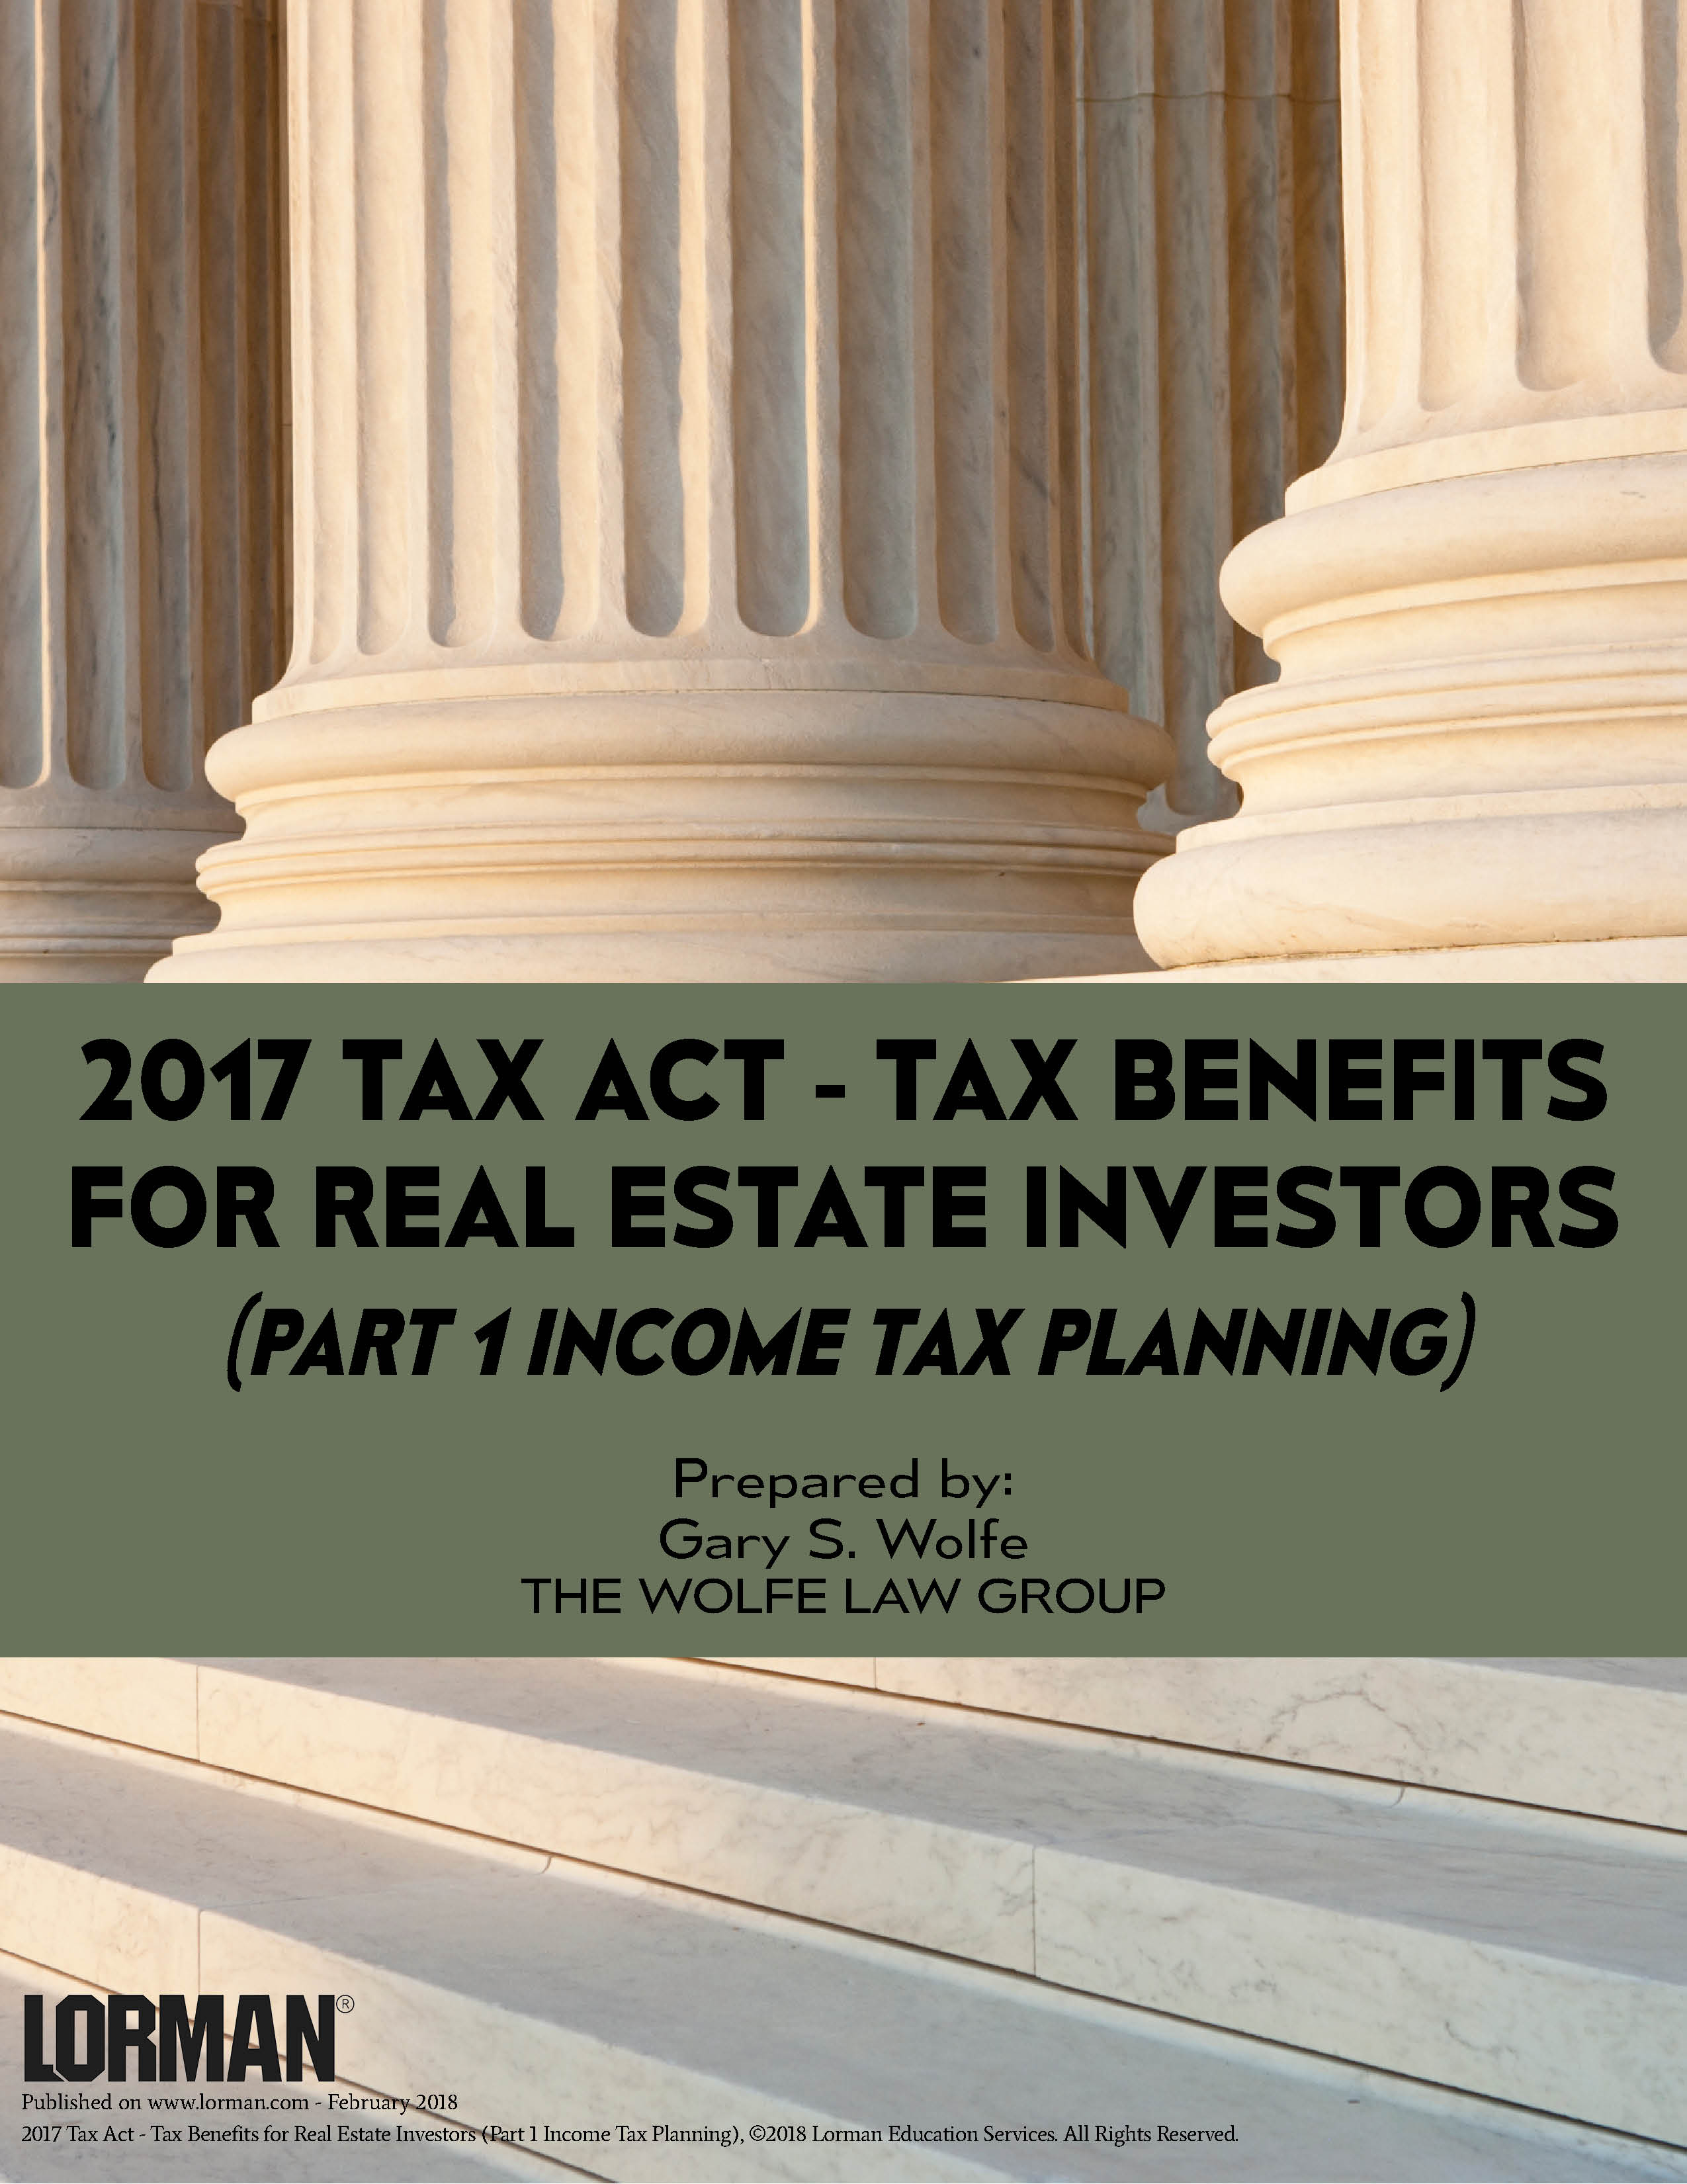 2017 Tax Act - Tax Benefits for Real Estate Investors (Part 1 Income Tax Planning)